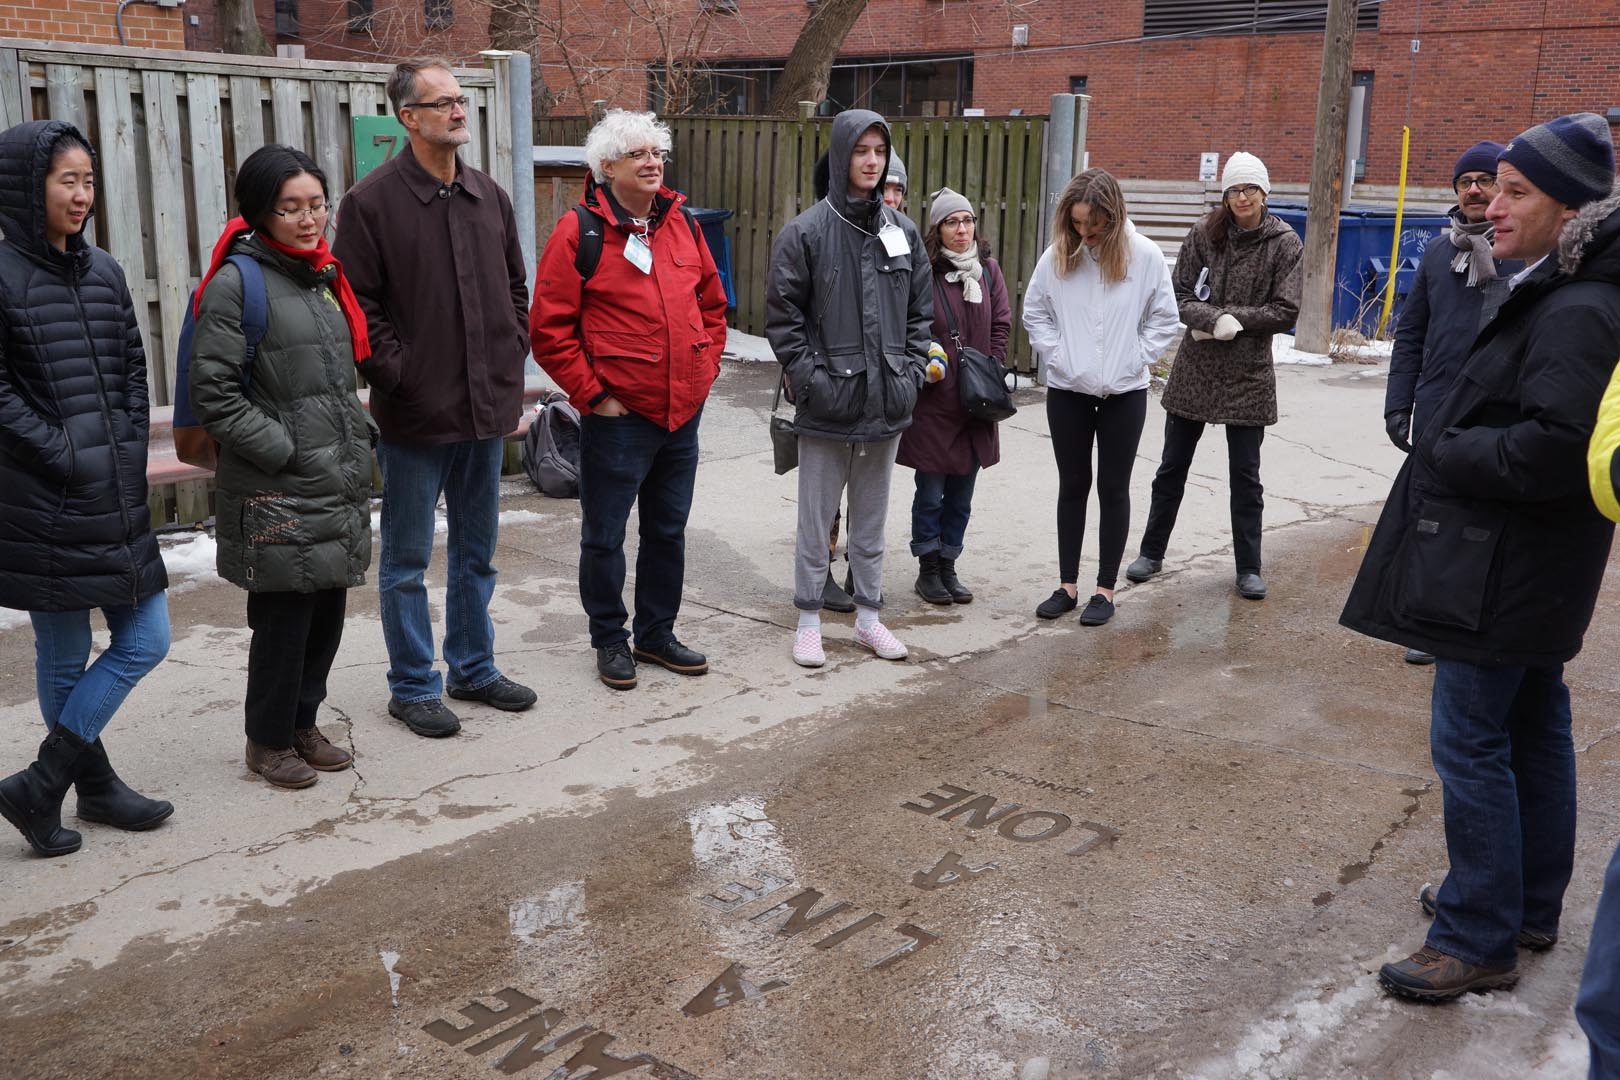 Stuart: “Adam Sol and Hector Ruíz give some background on Coach House Press and bpNichol before we read in chorus bp's 'concrete poem' in bpNichol Lane.”